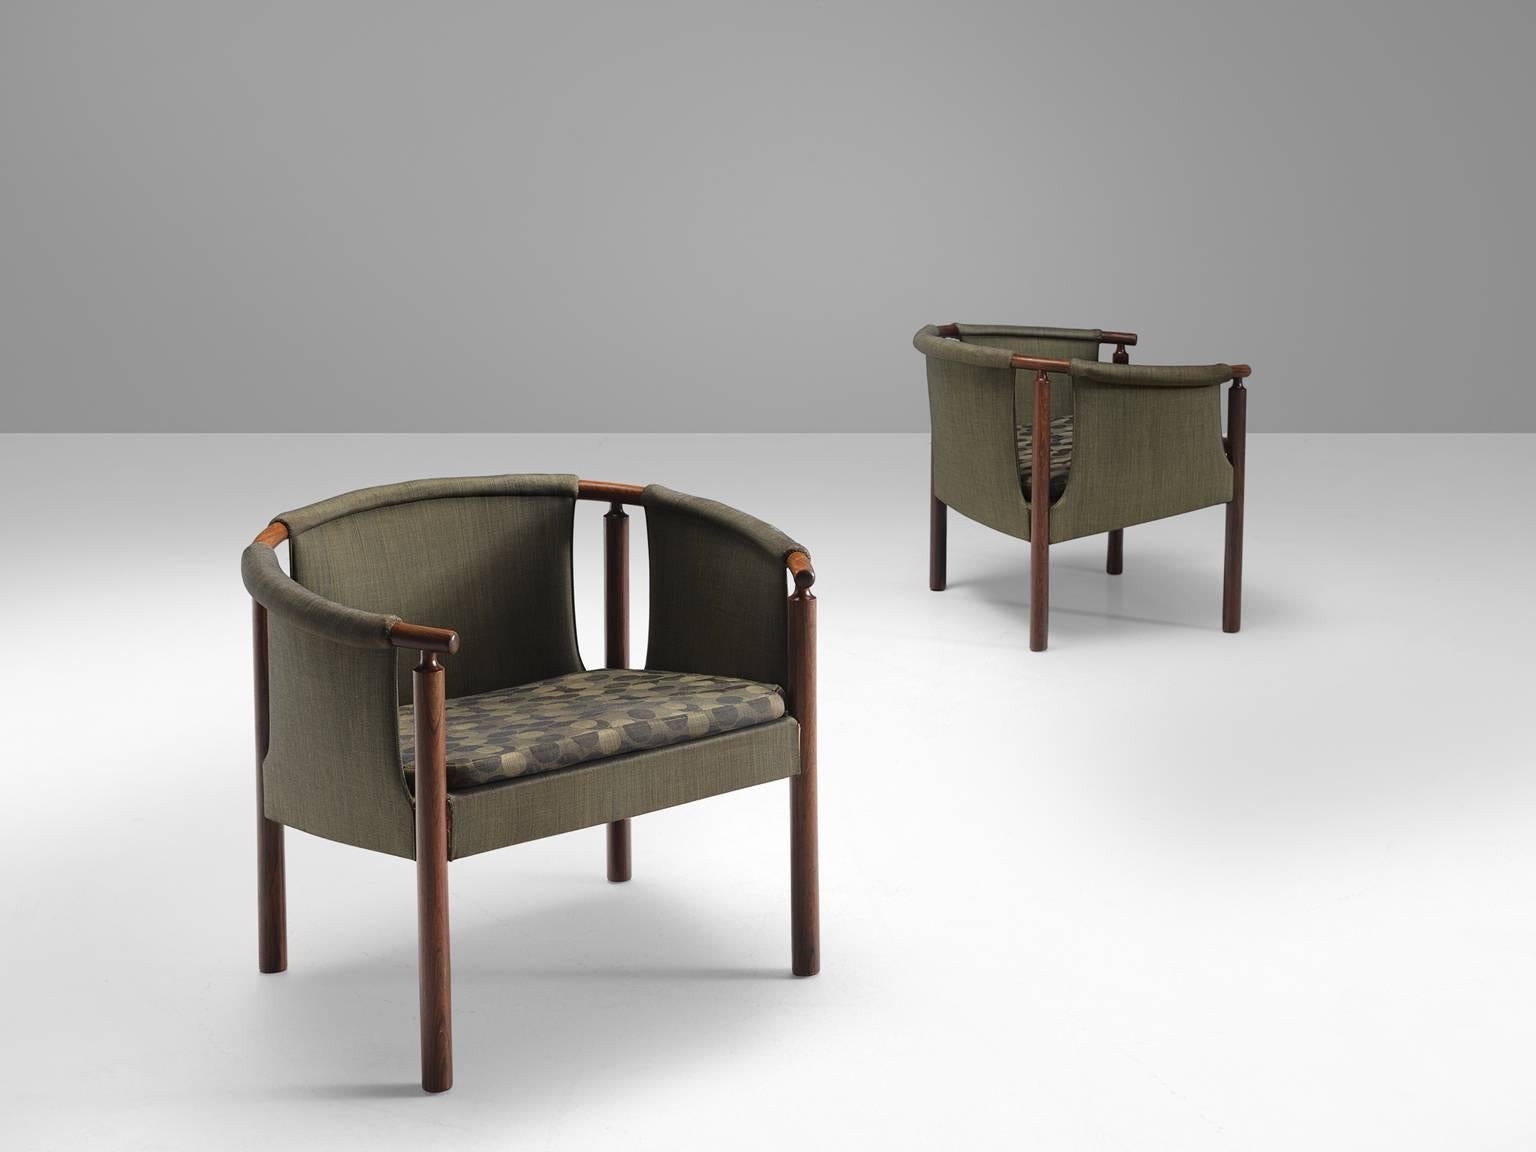 Arne Wahl Iversen for Poul M. Jessen, pair of rosewood armchairs 293/3 with green fabric, Denmark, 1950s.

This set of armchairs is upholstered with green fabric. The inventiveness of this chair lies in the open spaces next to the rosewood frame.